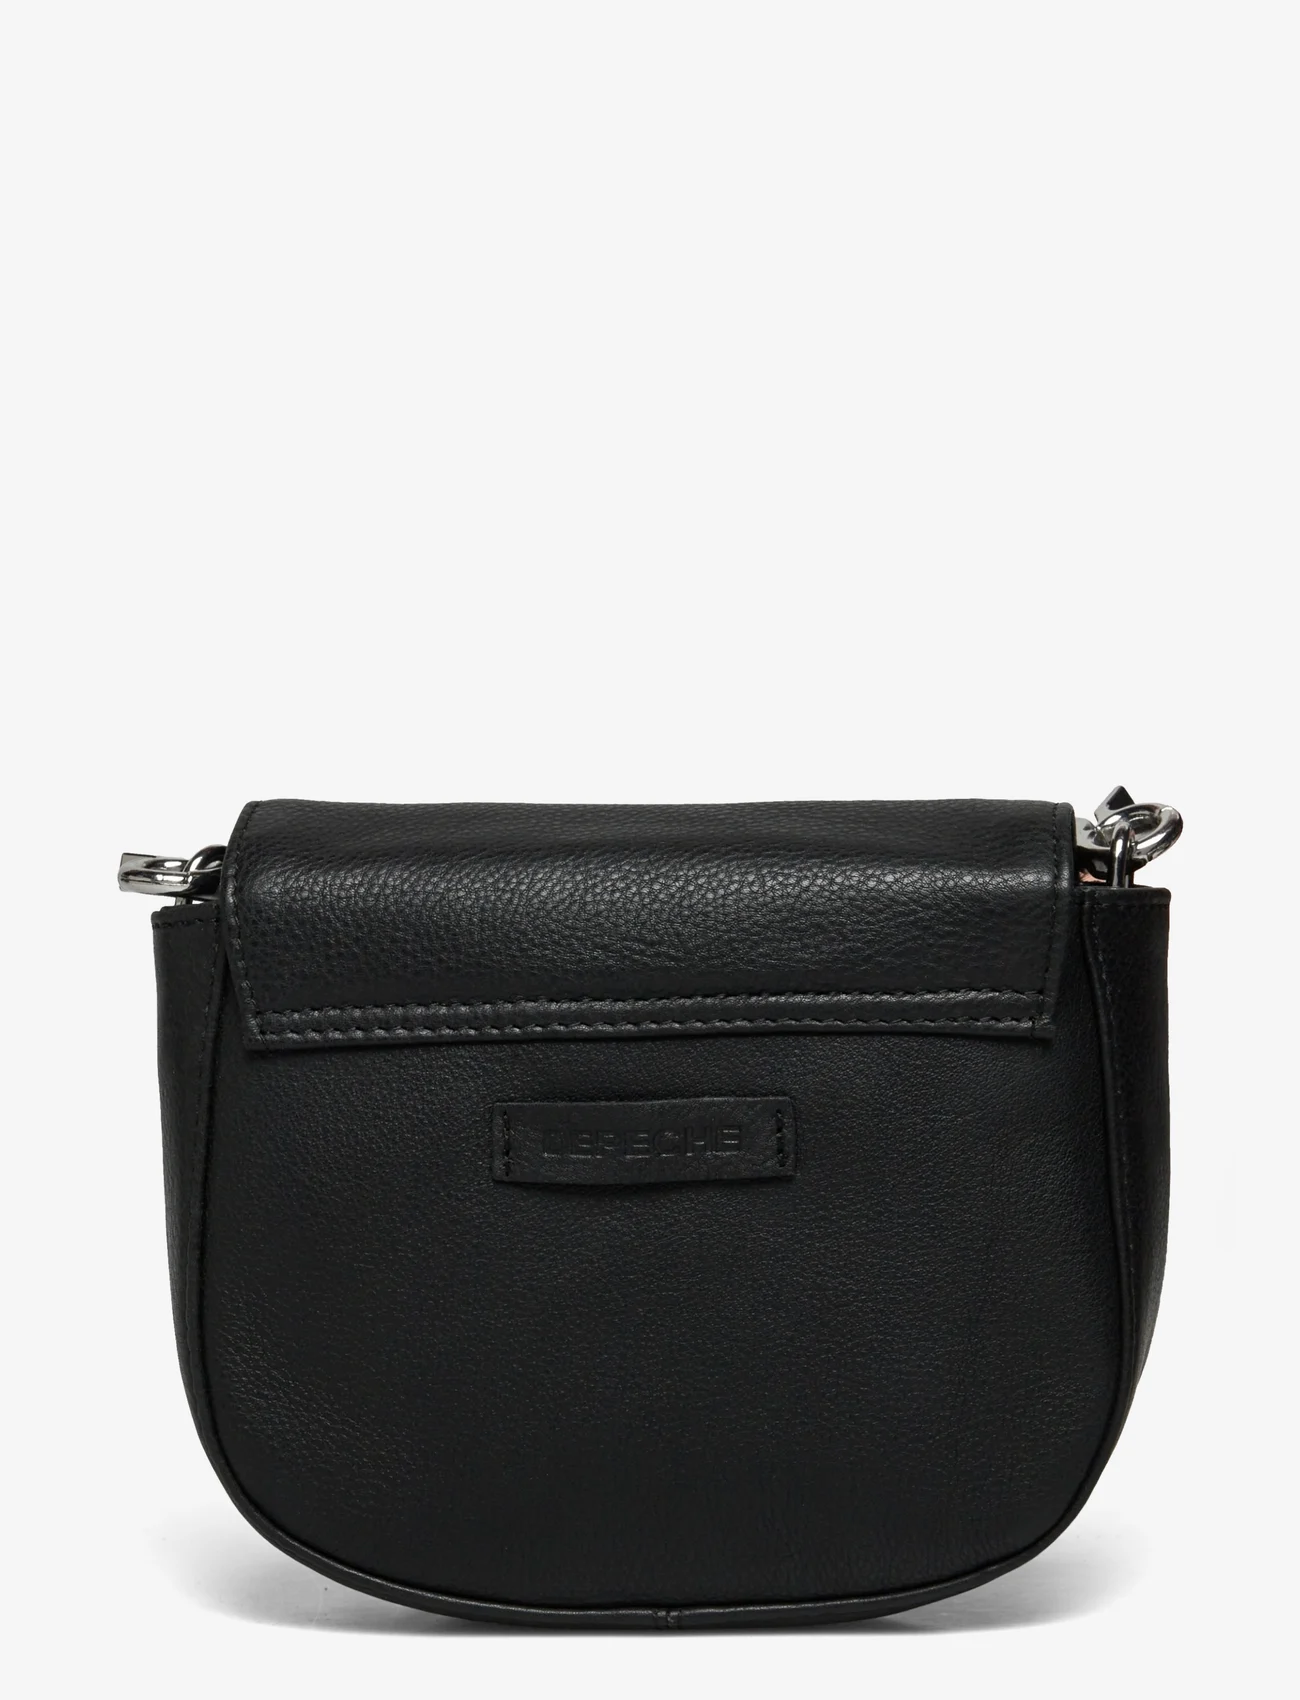 DEPECHE - Small bag / Clutch - peoriided outlet-hindadega - 099 black (nero) - 1